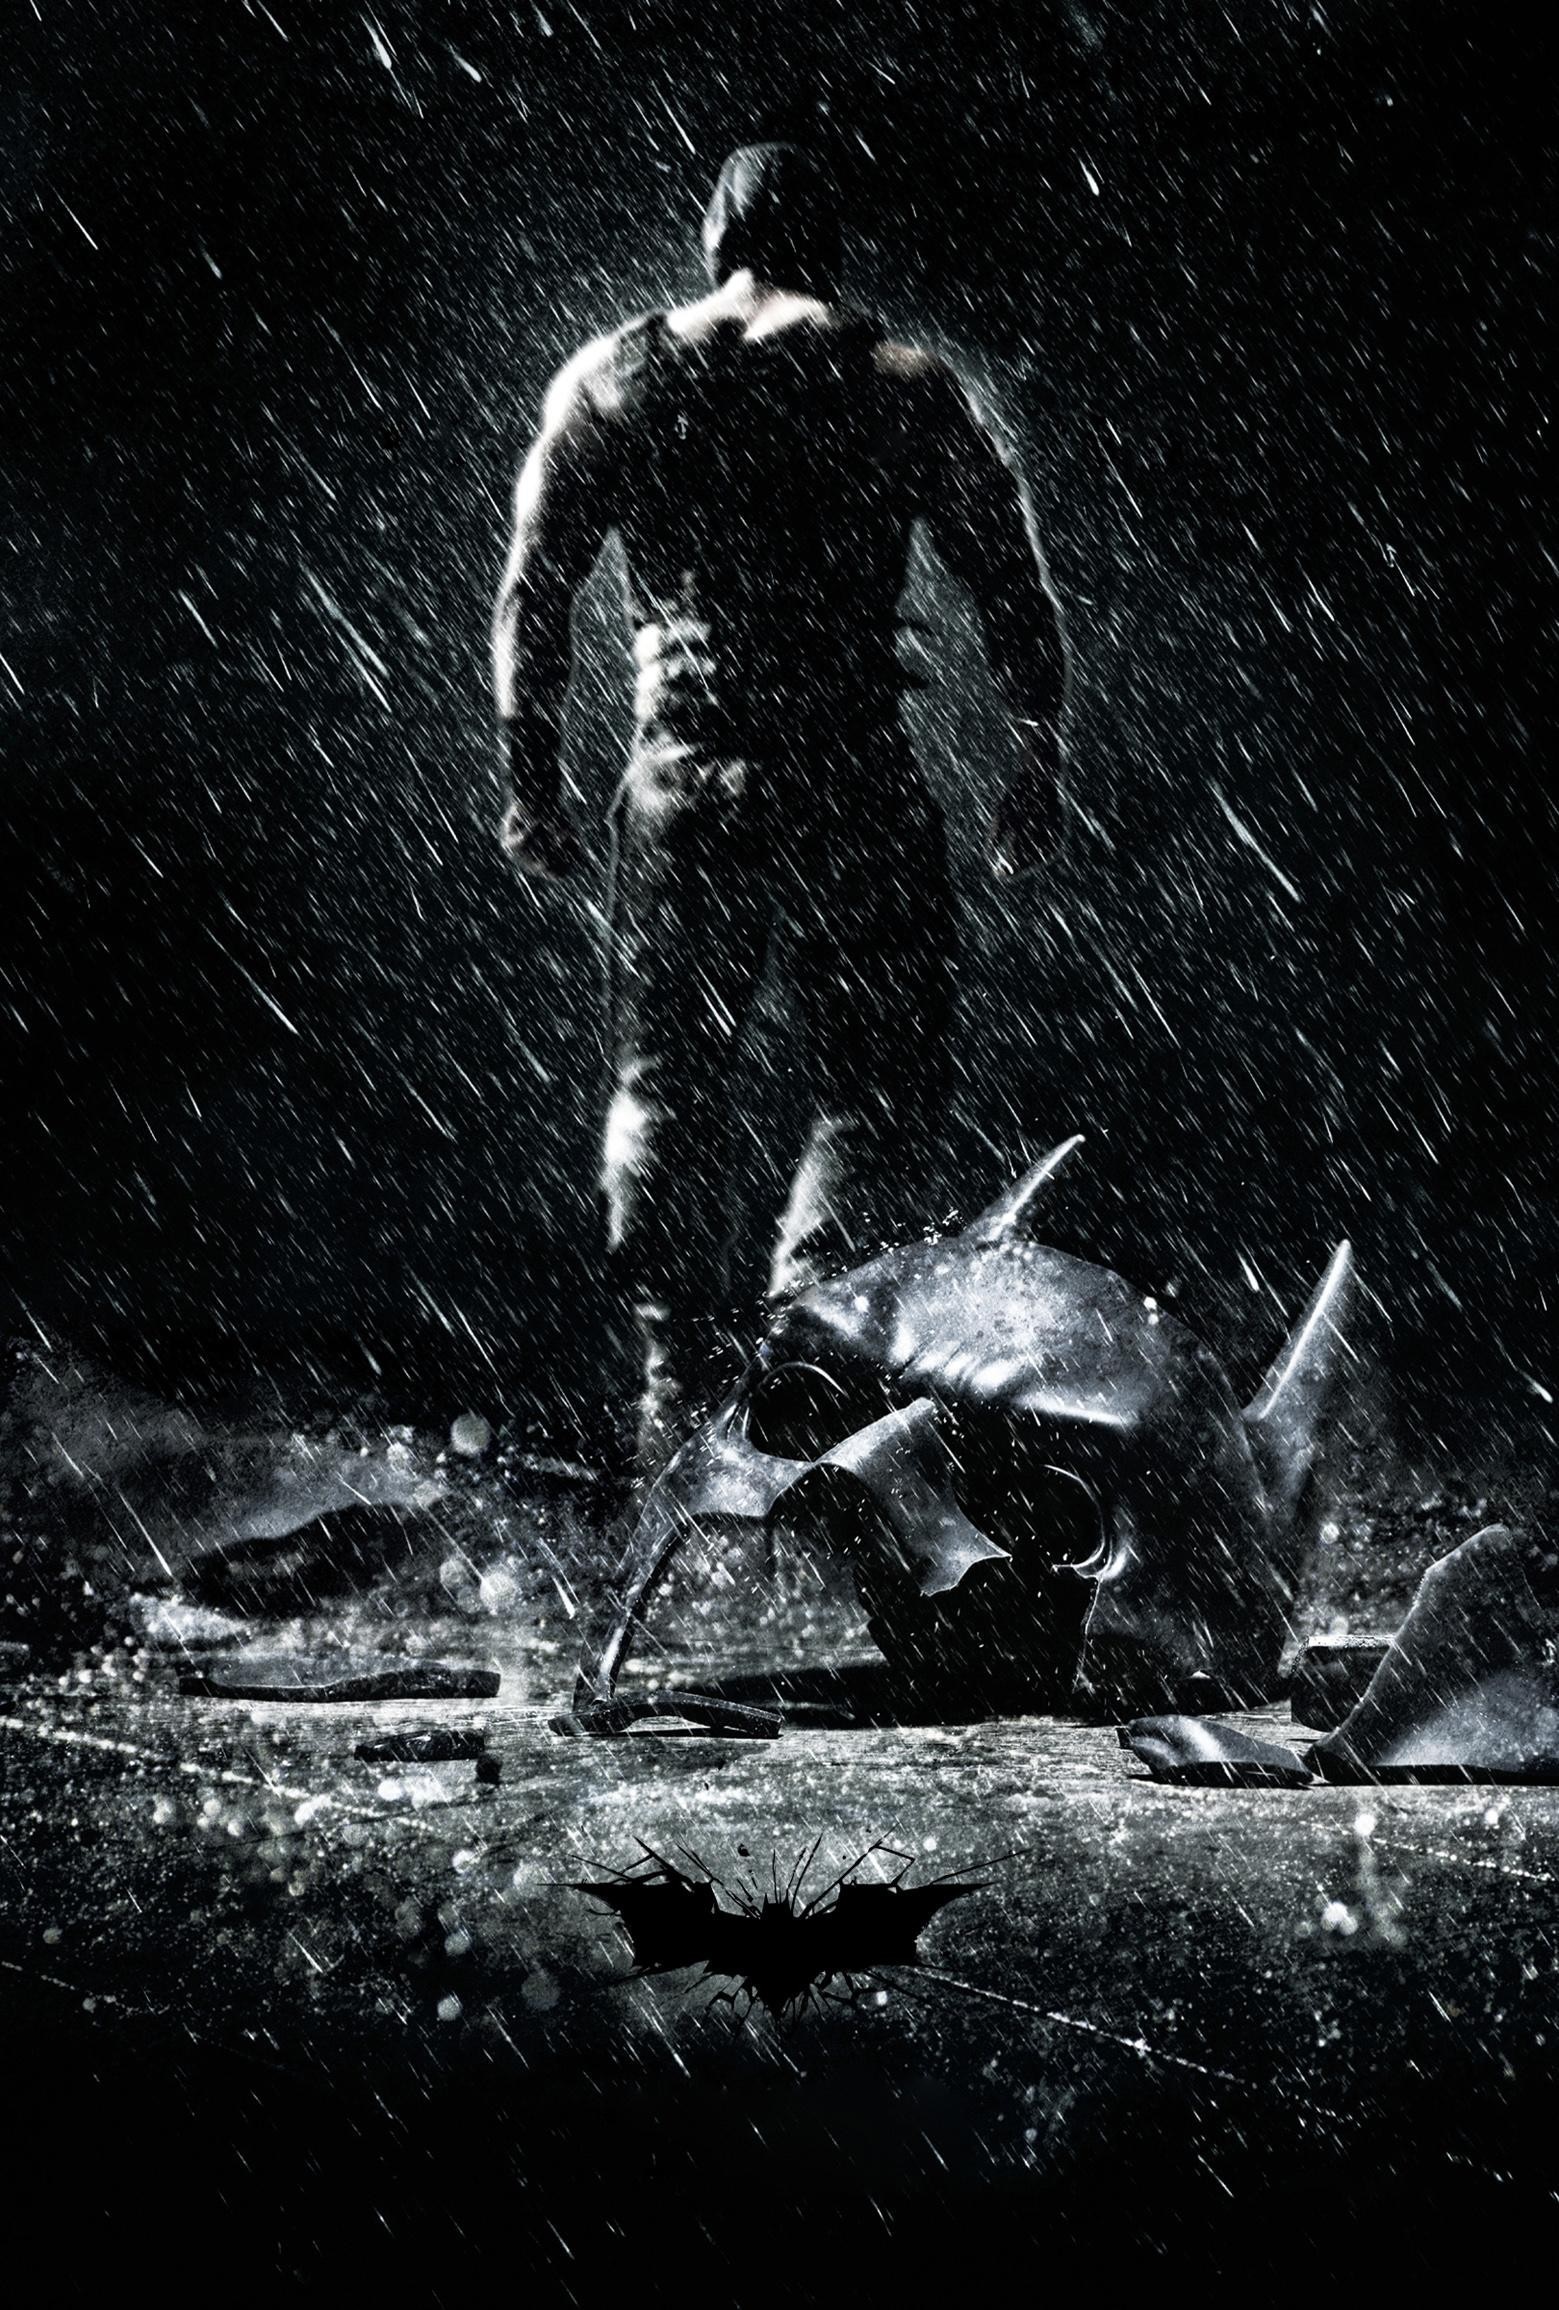 monochrome, mask, Batman, movie poster, moonlight, The Dark Knight Rises, midnight, darkness, computer wallpaper, black and white, monochrome photography, fictional character, album cover Gallery HD Wallpaper